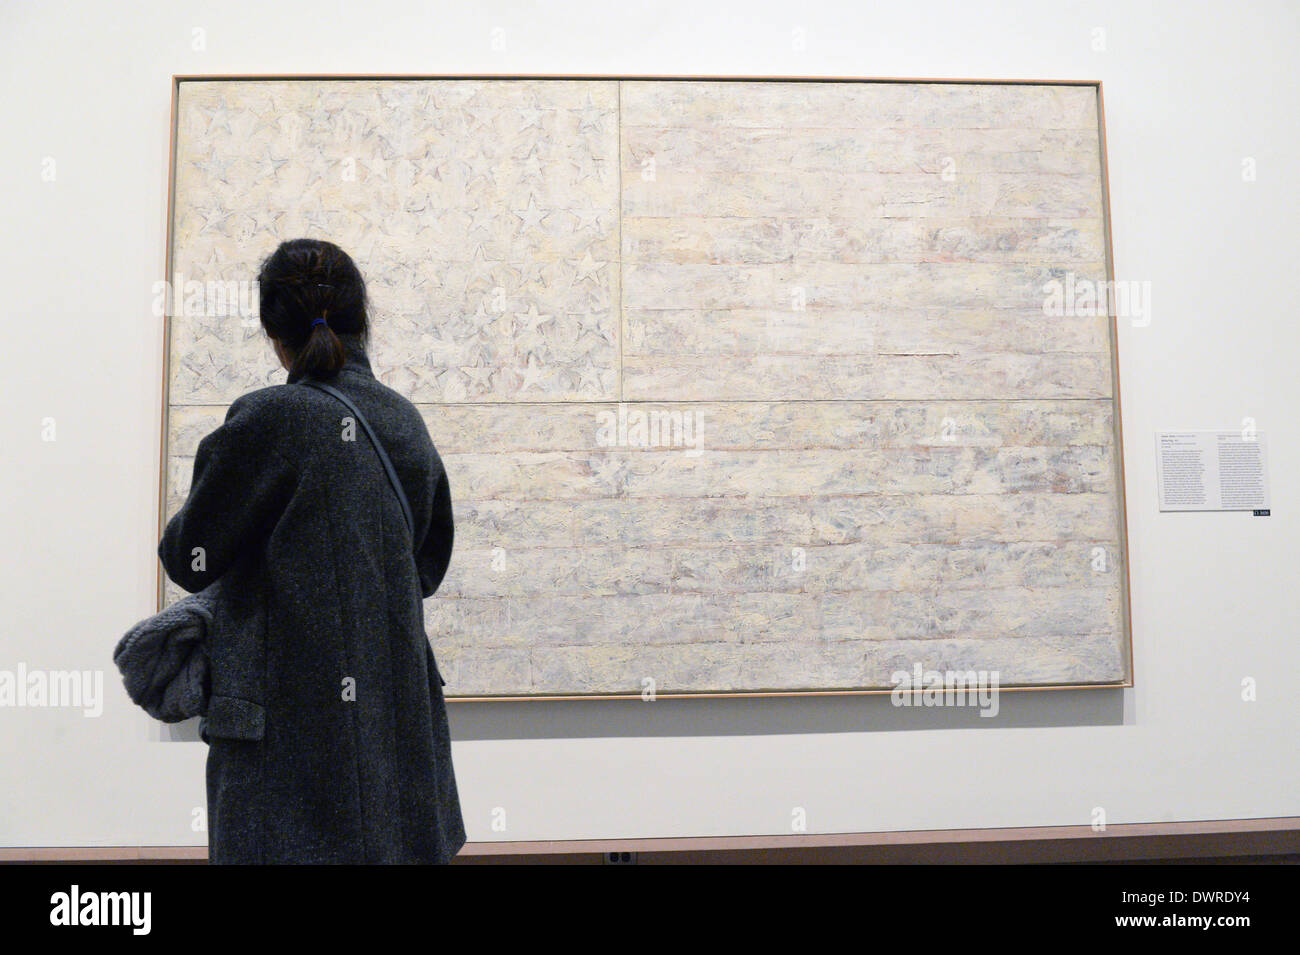 New York City, USA. 08th Mar, 2014. The work 'White Flag' by Jasper Johns is on display in the Metropolitan Museum of Art in New York City, USA, 08 March 2014. Photo: Felix Hoerhager/dpa/Alamy Live News Stock Photo